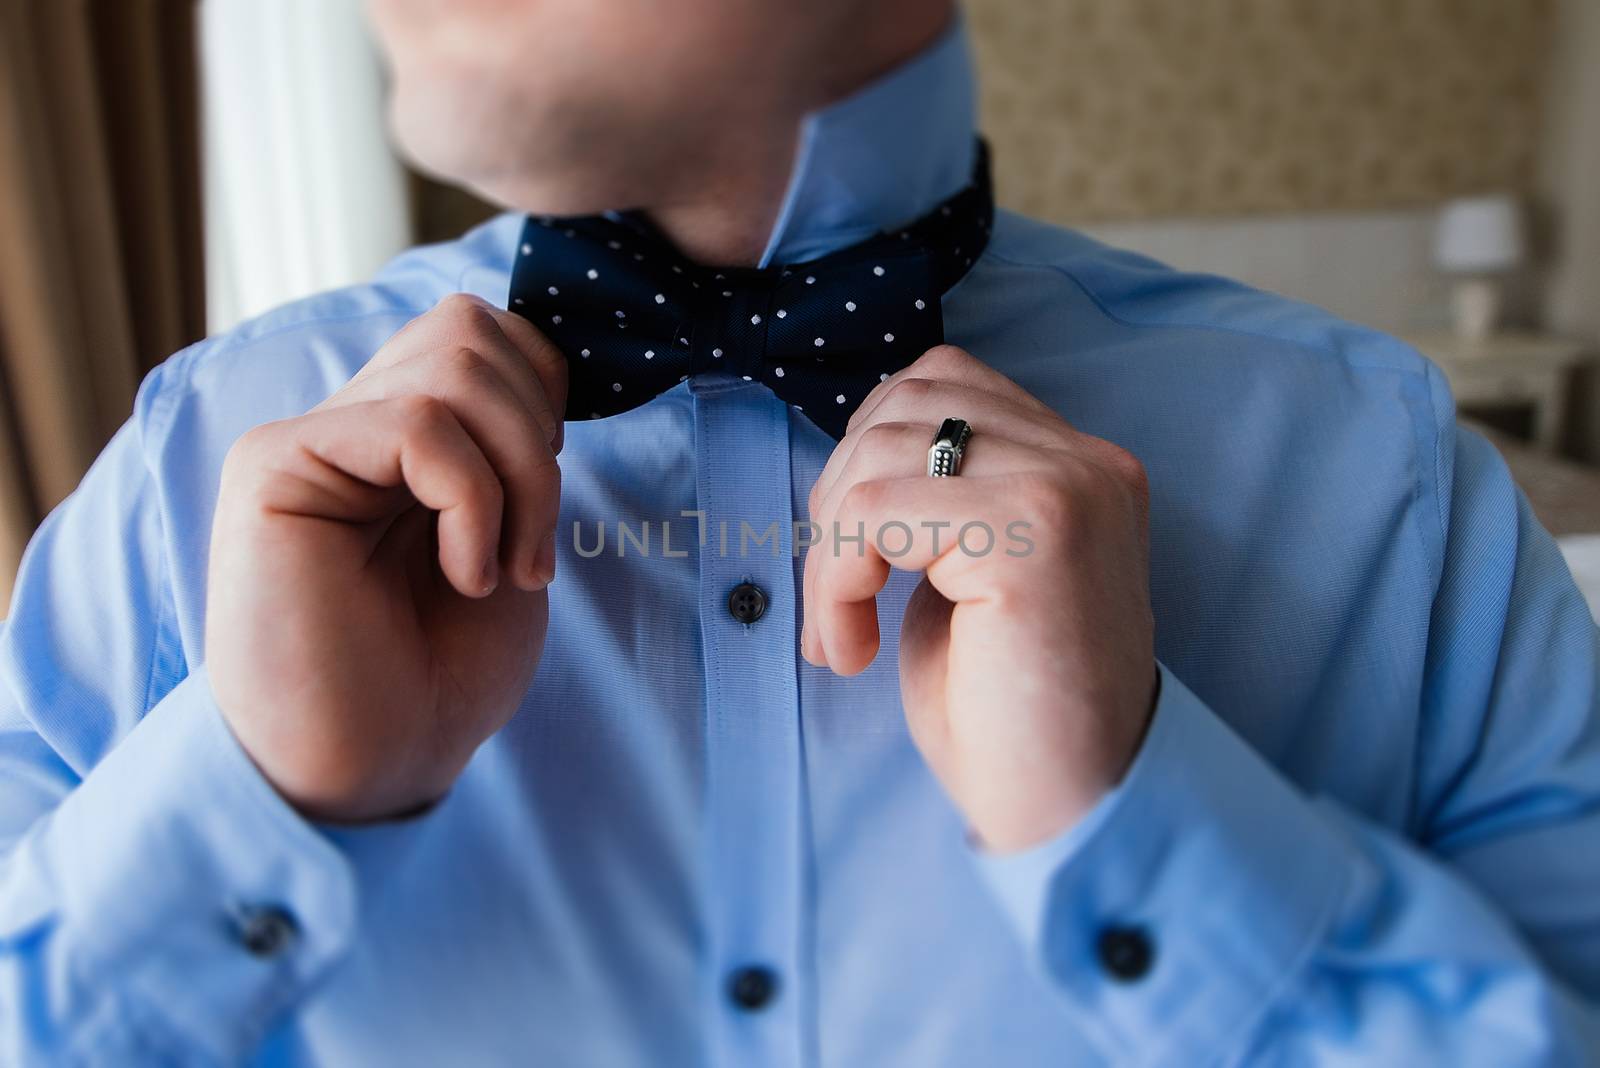 The groom in a blue shirt holding a bow tie in his hands